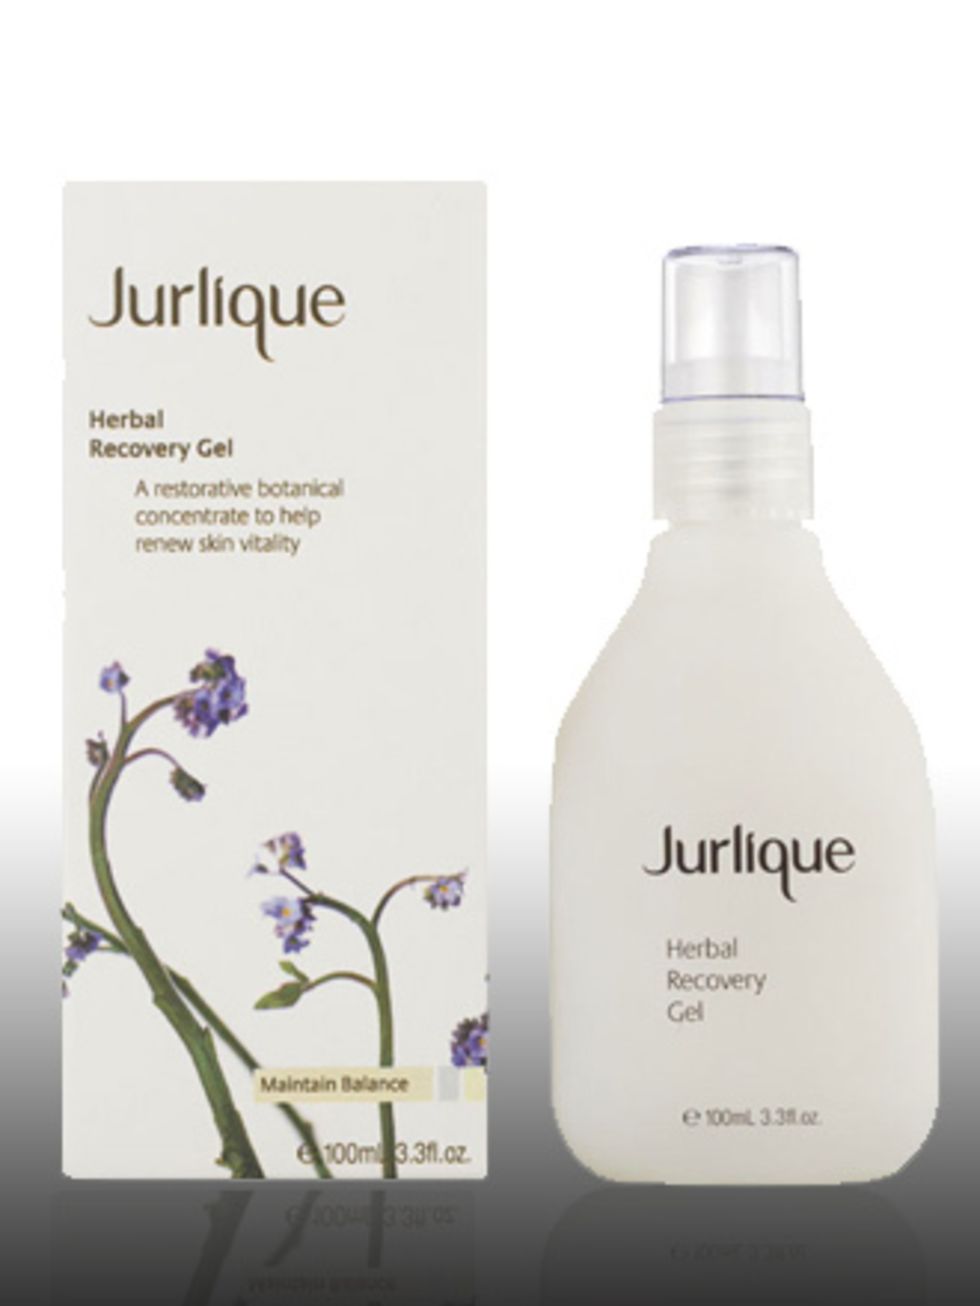 <p>Herbal Recovery Gel, £45 by Jurlique at <a href="http://www.hqhair.com/code/products.asp?PageID=1495&amp;SectionID=2142&amp;FeaturedID=20157&amp;FeaturedProduct=13563&amp;pID=1">HQhair</a> </p><p>Jurlique farm their own ingredients in a sustainable way